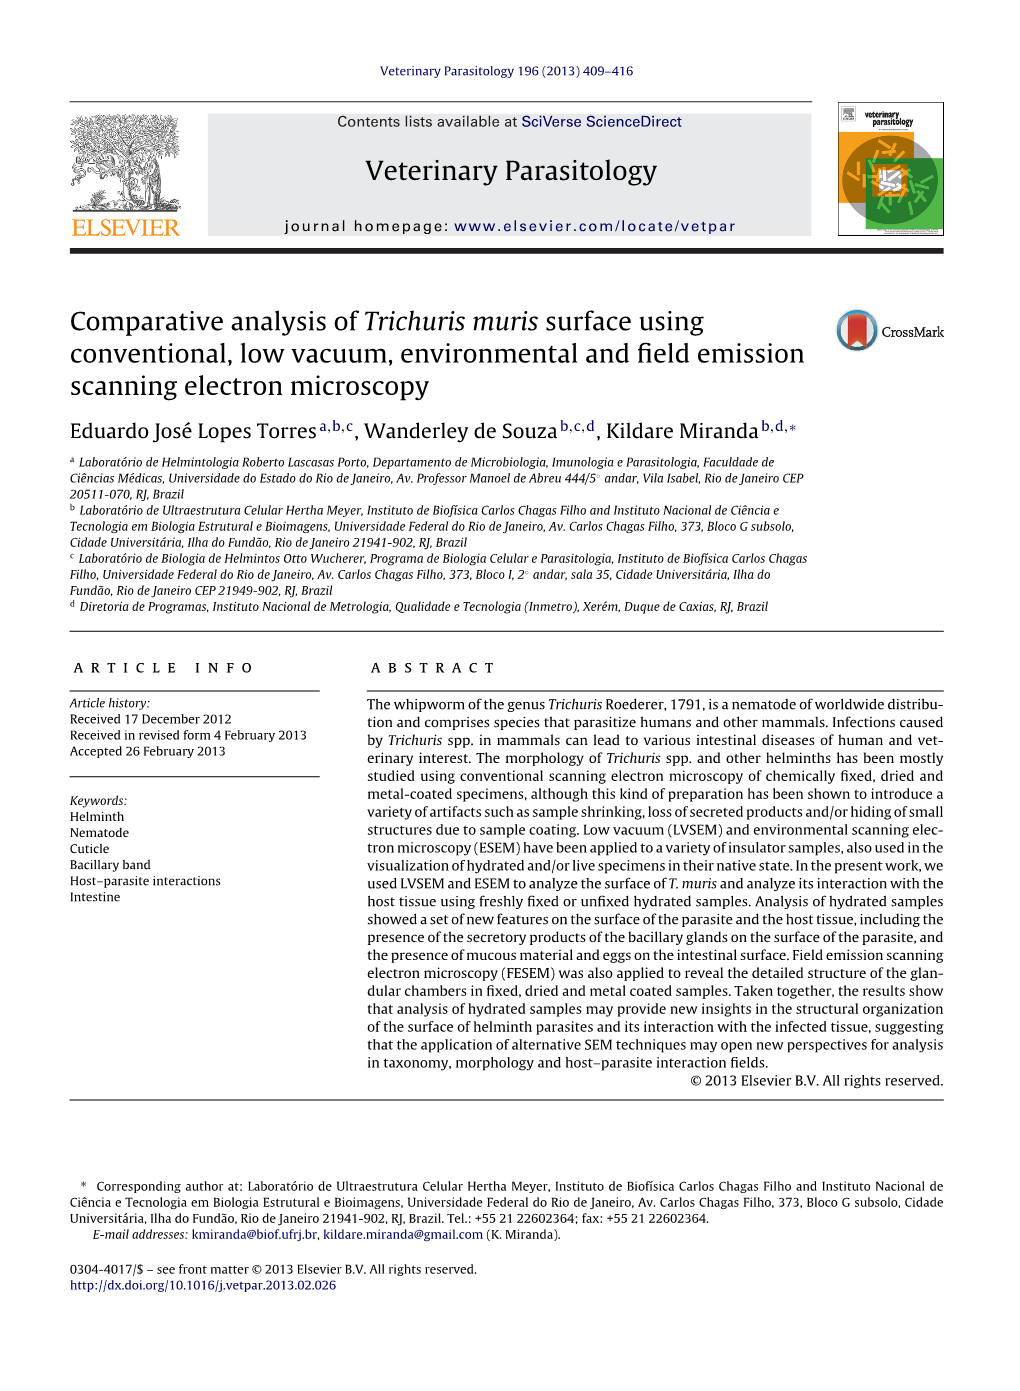 Comparative Analysis of Trichuris Muris Surface Using Conventional, Low Vacuum, Environmental and ﬁeld Emission Scanning Electron Microscopy